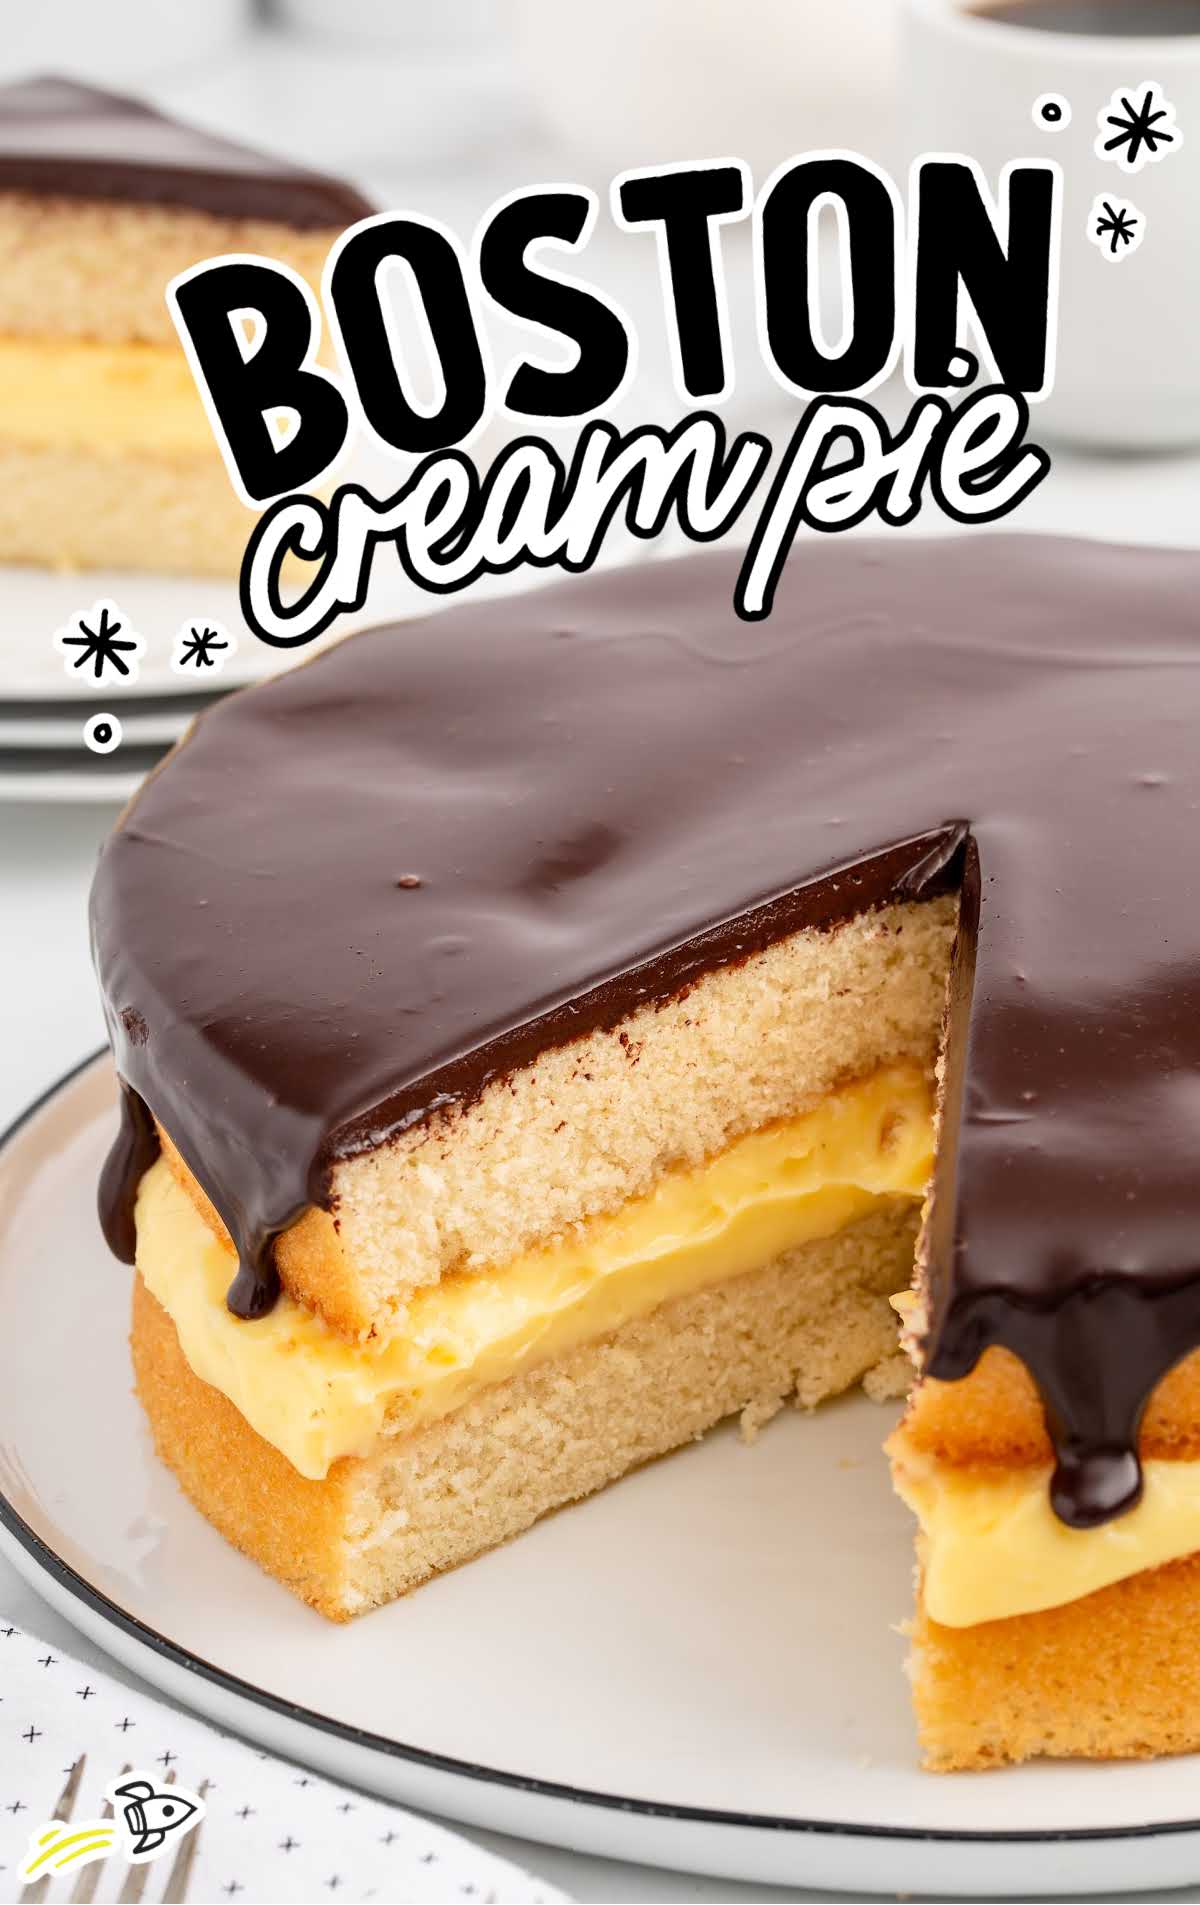 Boston Cream Pie with a slice missing on a plate